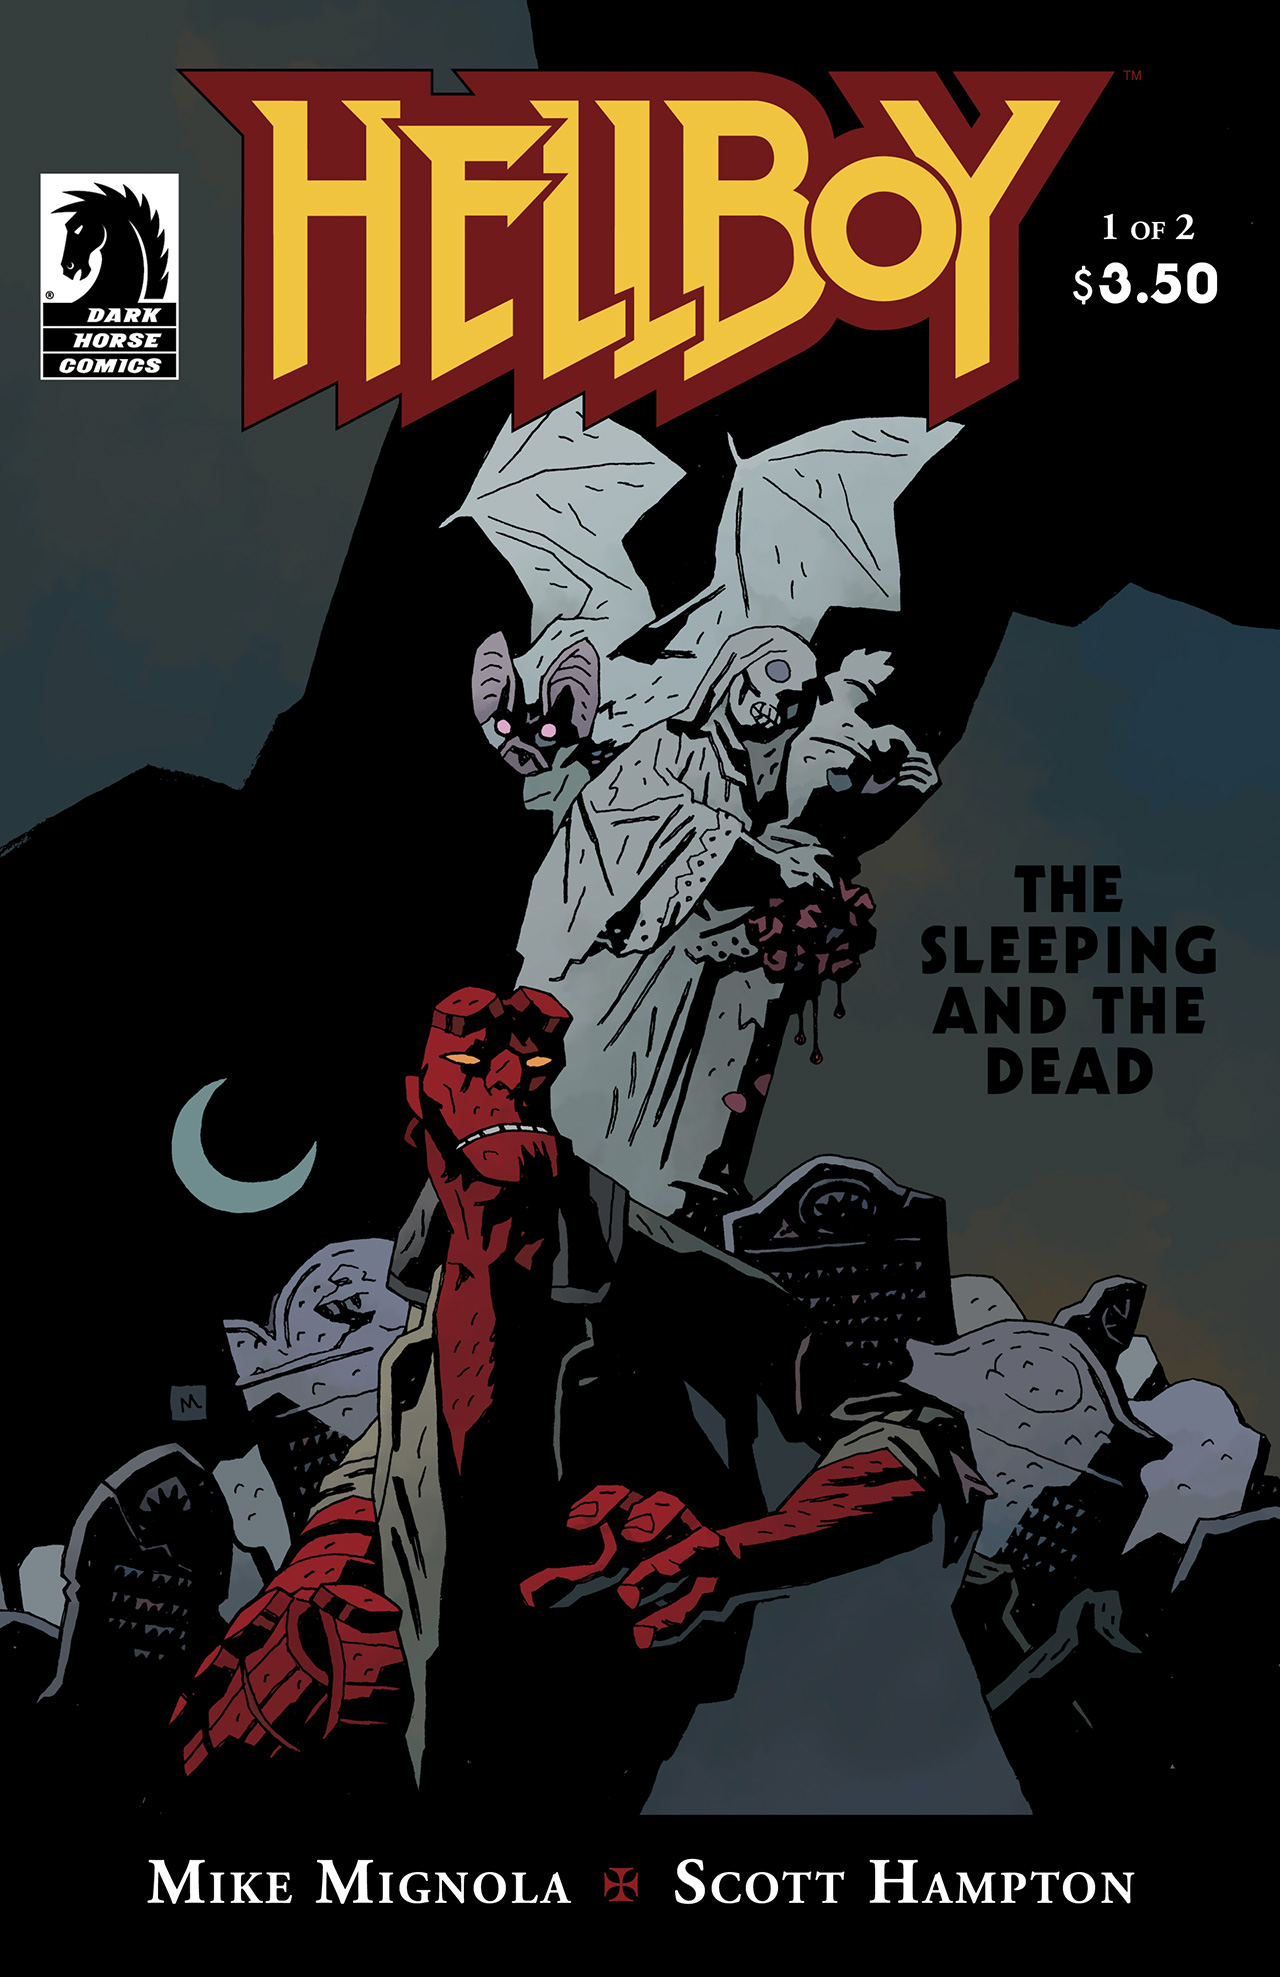 Hellboy: The Sleeping and the Dead #1 - 1 of 2 